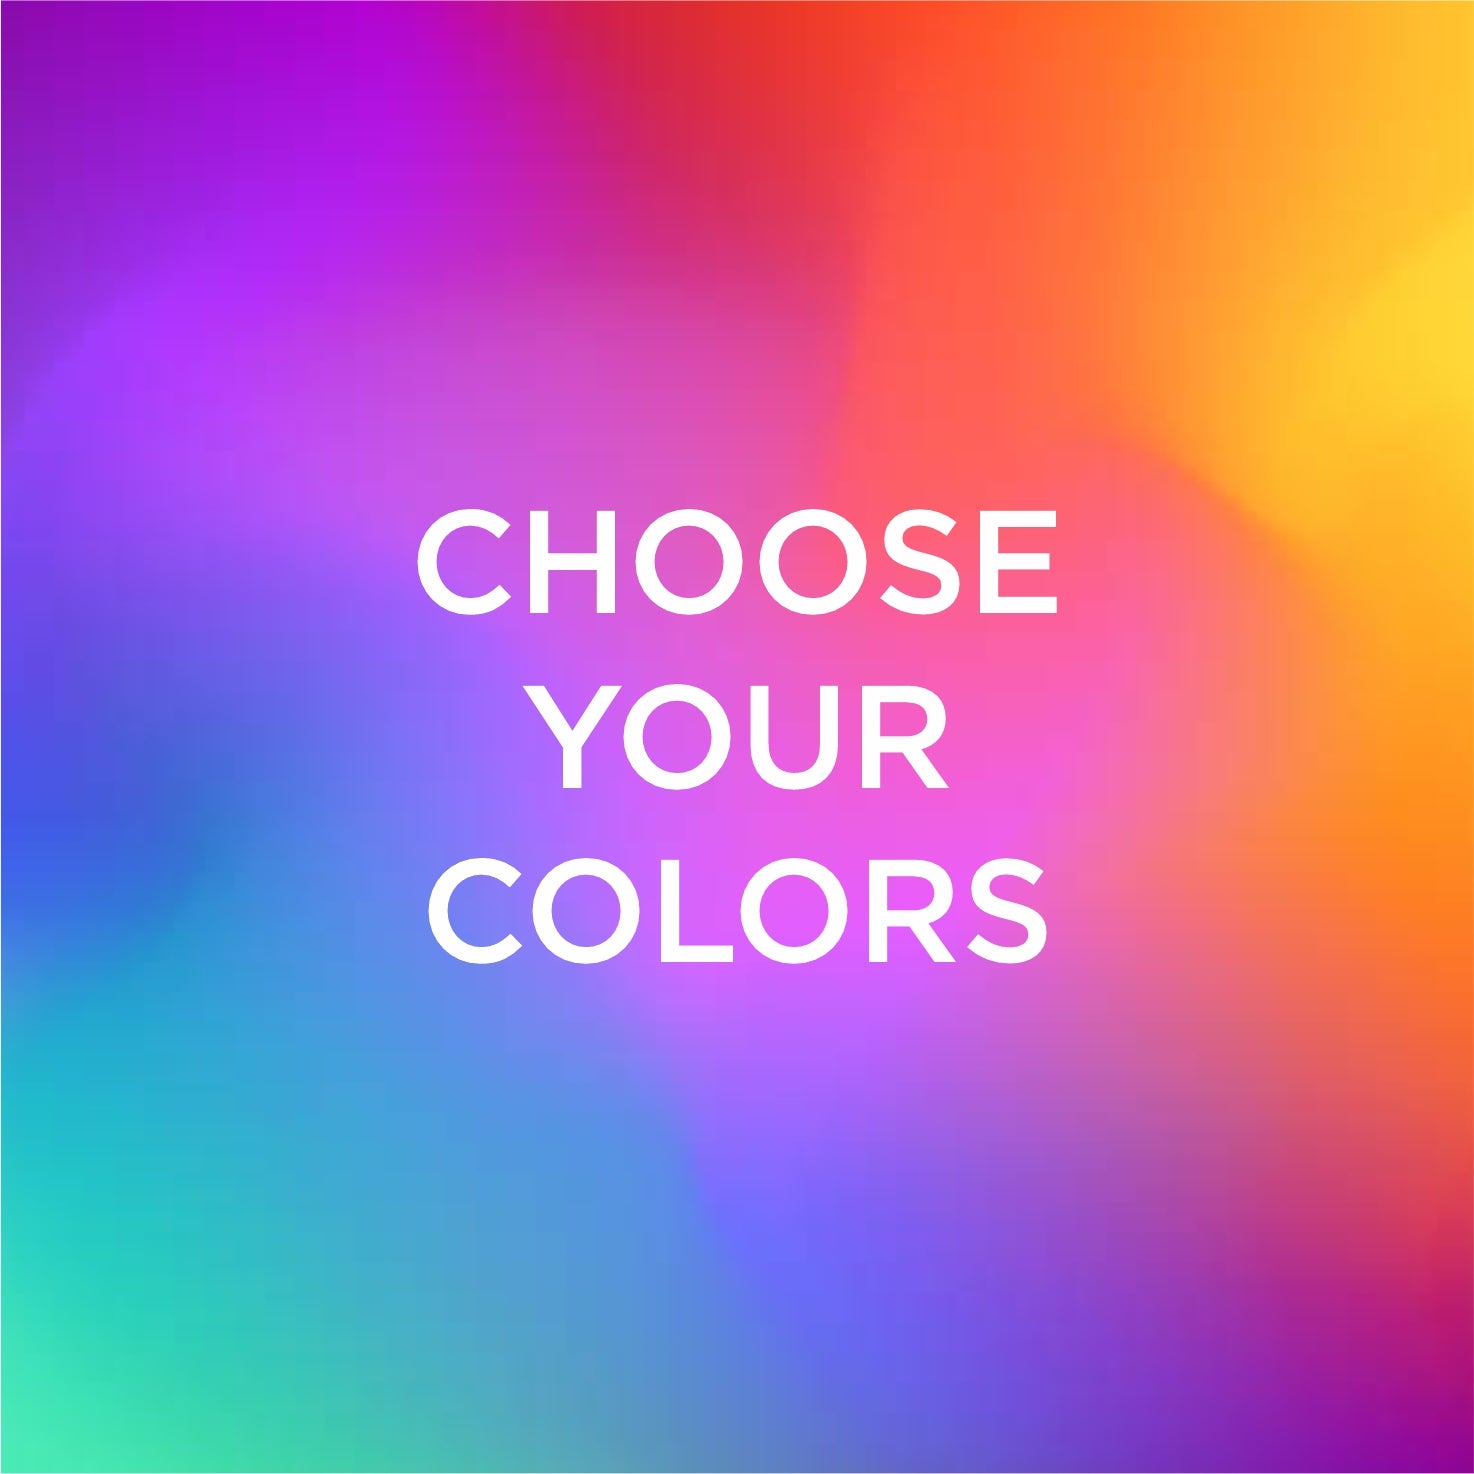 Own Colors